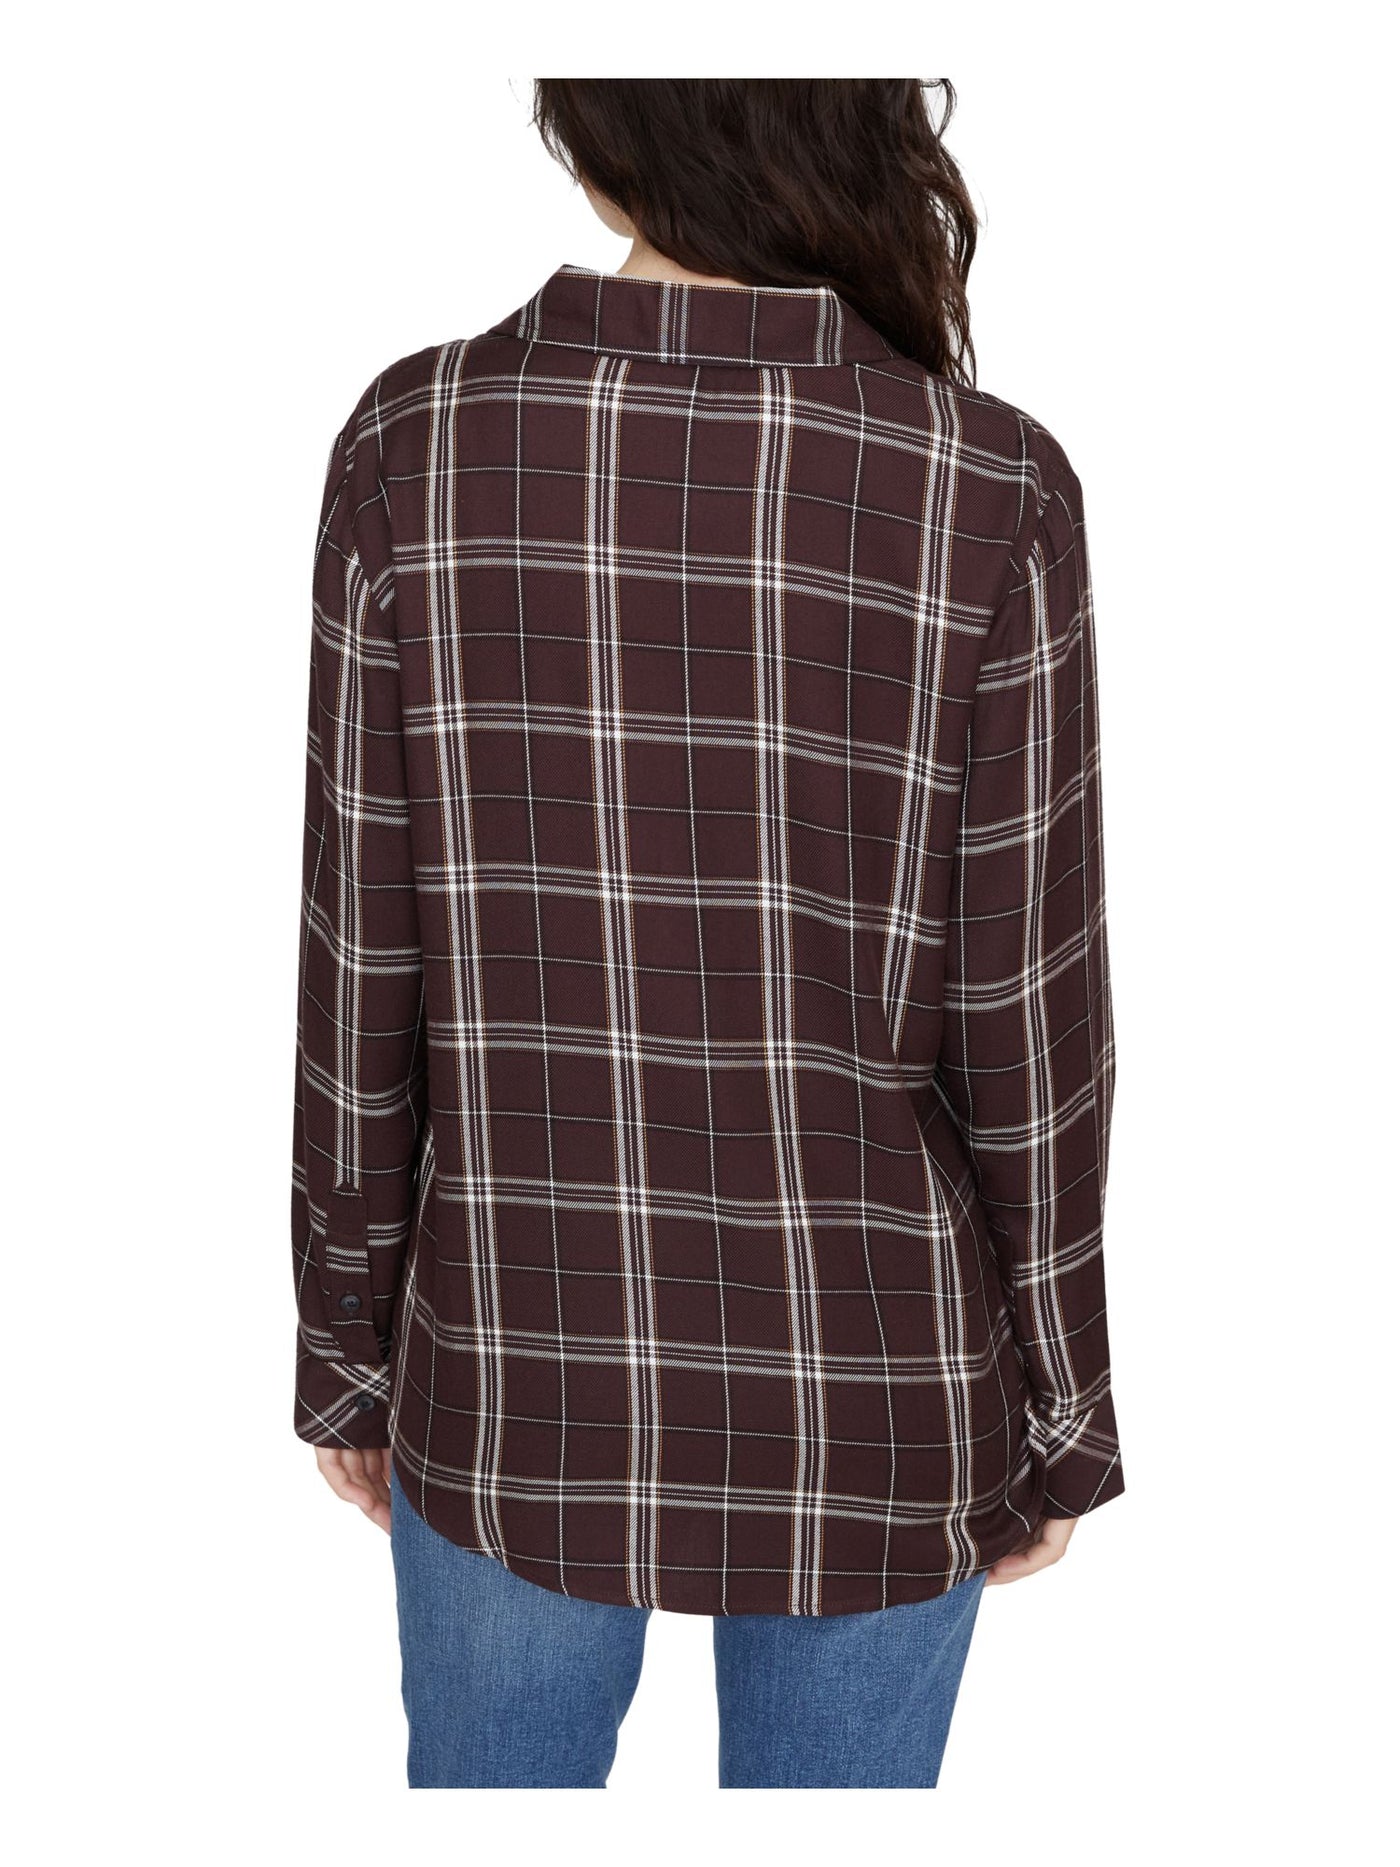 SANCTUARY Womens Burgundy Plaid Long Sleeve Collared Button Up Top XS